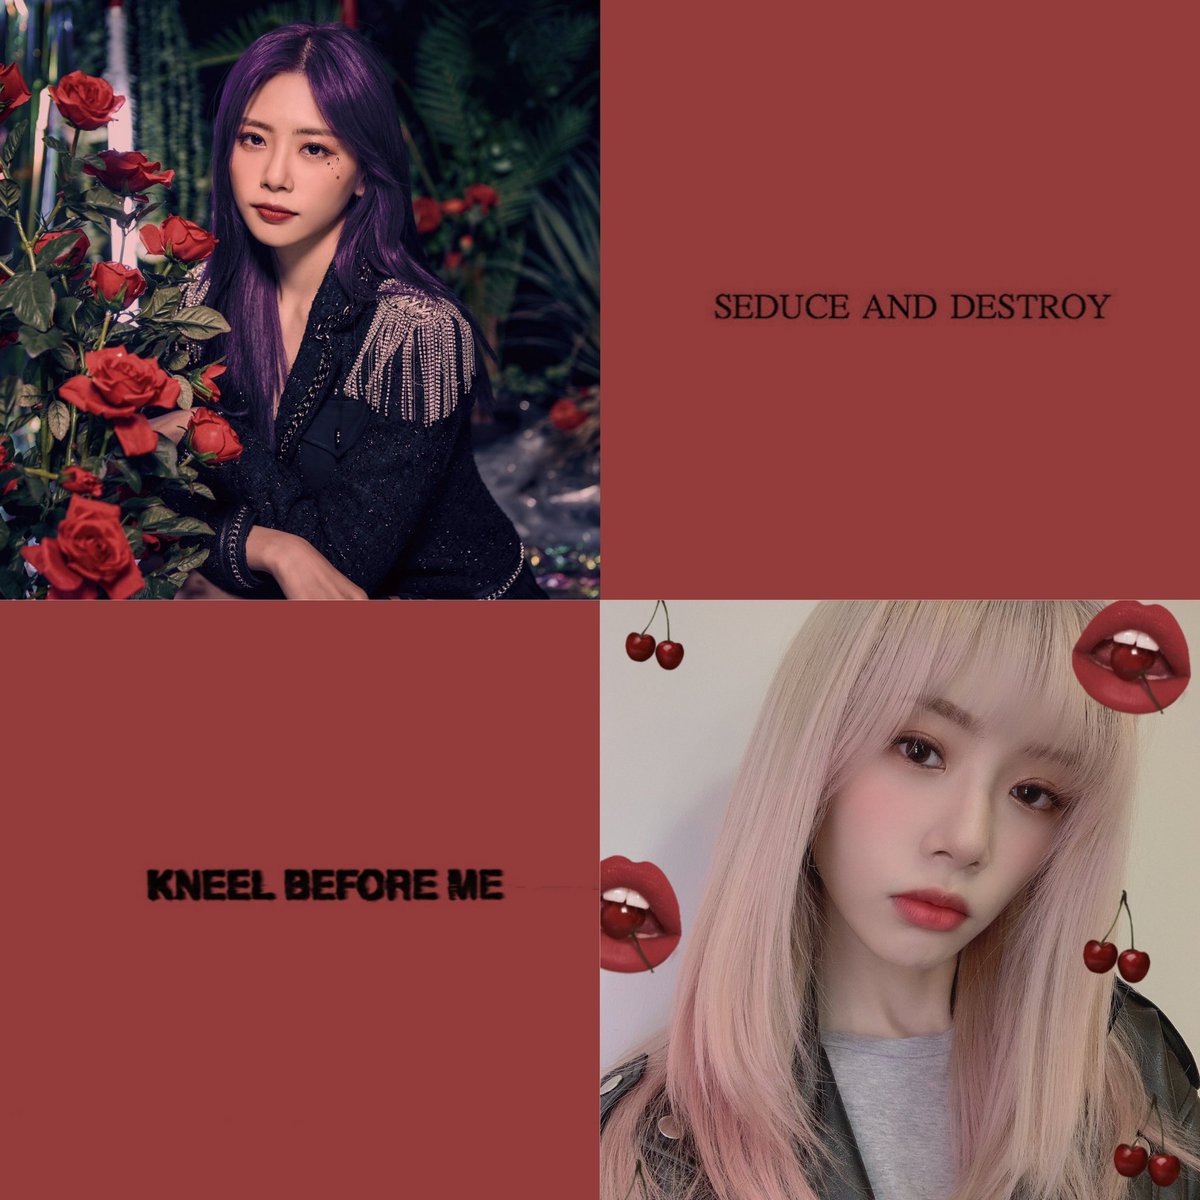 "i want to laugh when I see you struggle"vampire minji enjoys tormenting humans at night. a group of vampire hunters is after her, but minji won't let that stop her fun - instead she starts playing a dangerous game with them...